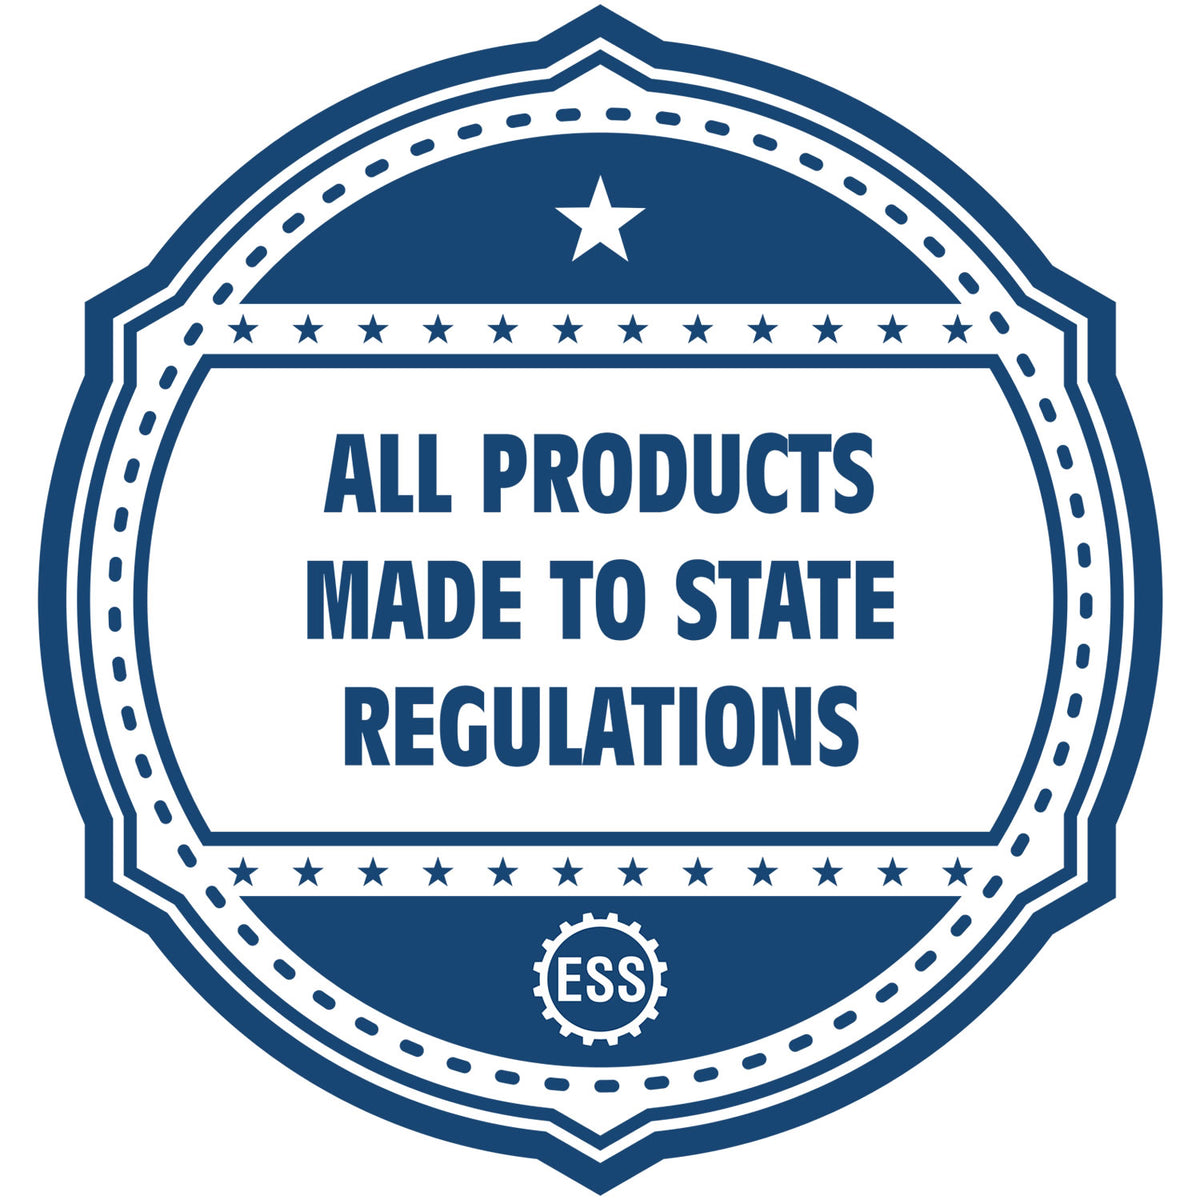 An icon or badge element for the Heavy-Duty Florida Rectangular Notary Stamp showing that this product is made in compliance with state regulations.